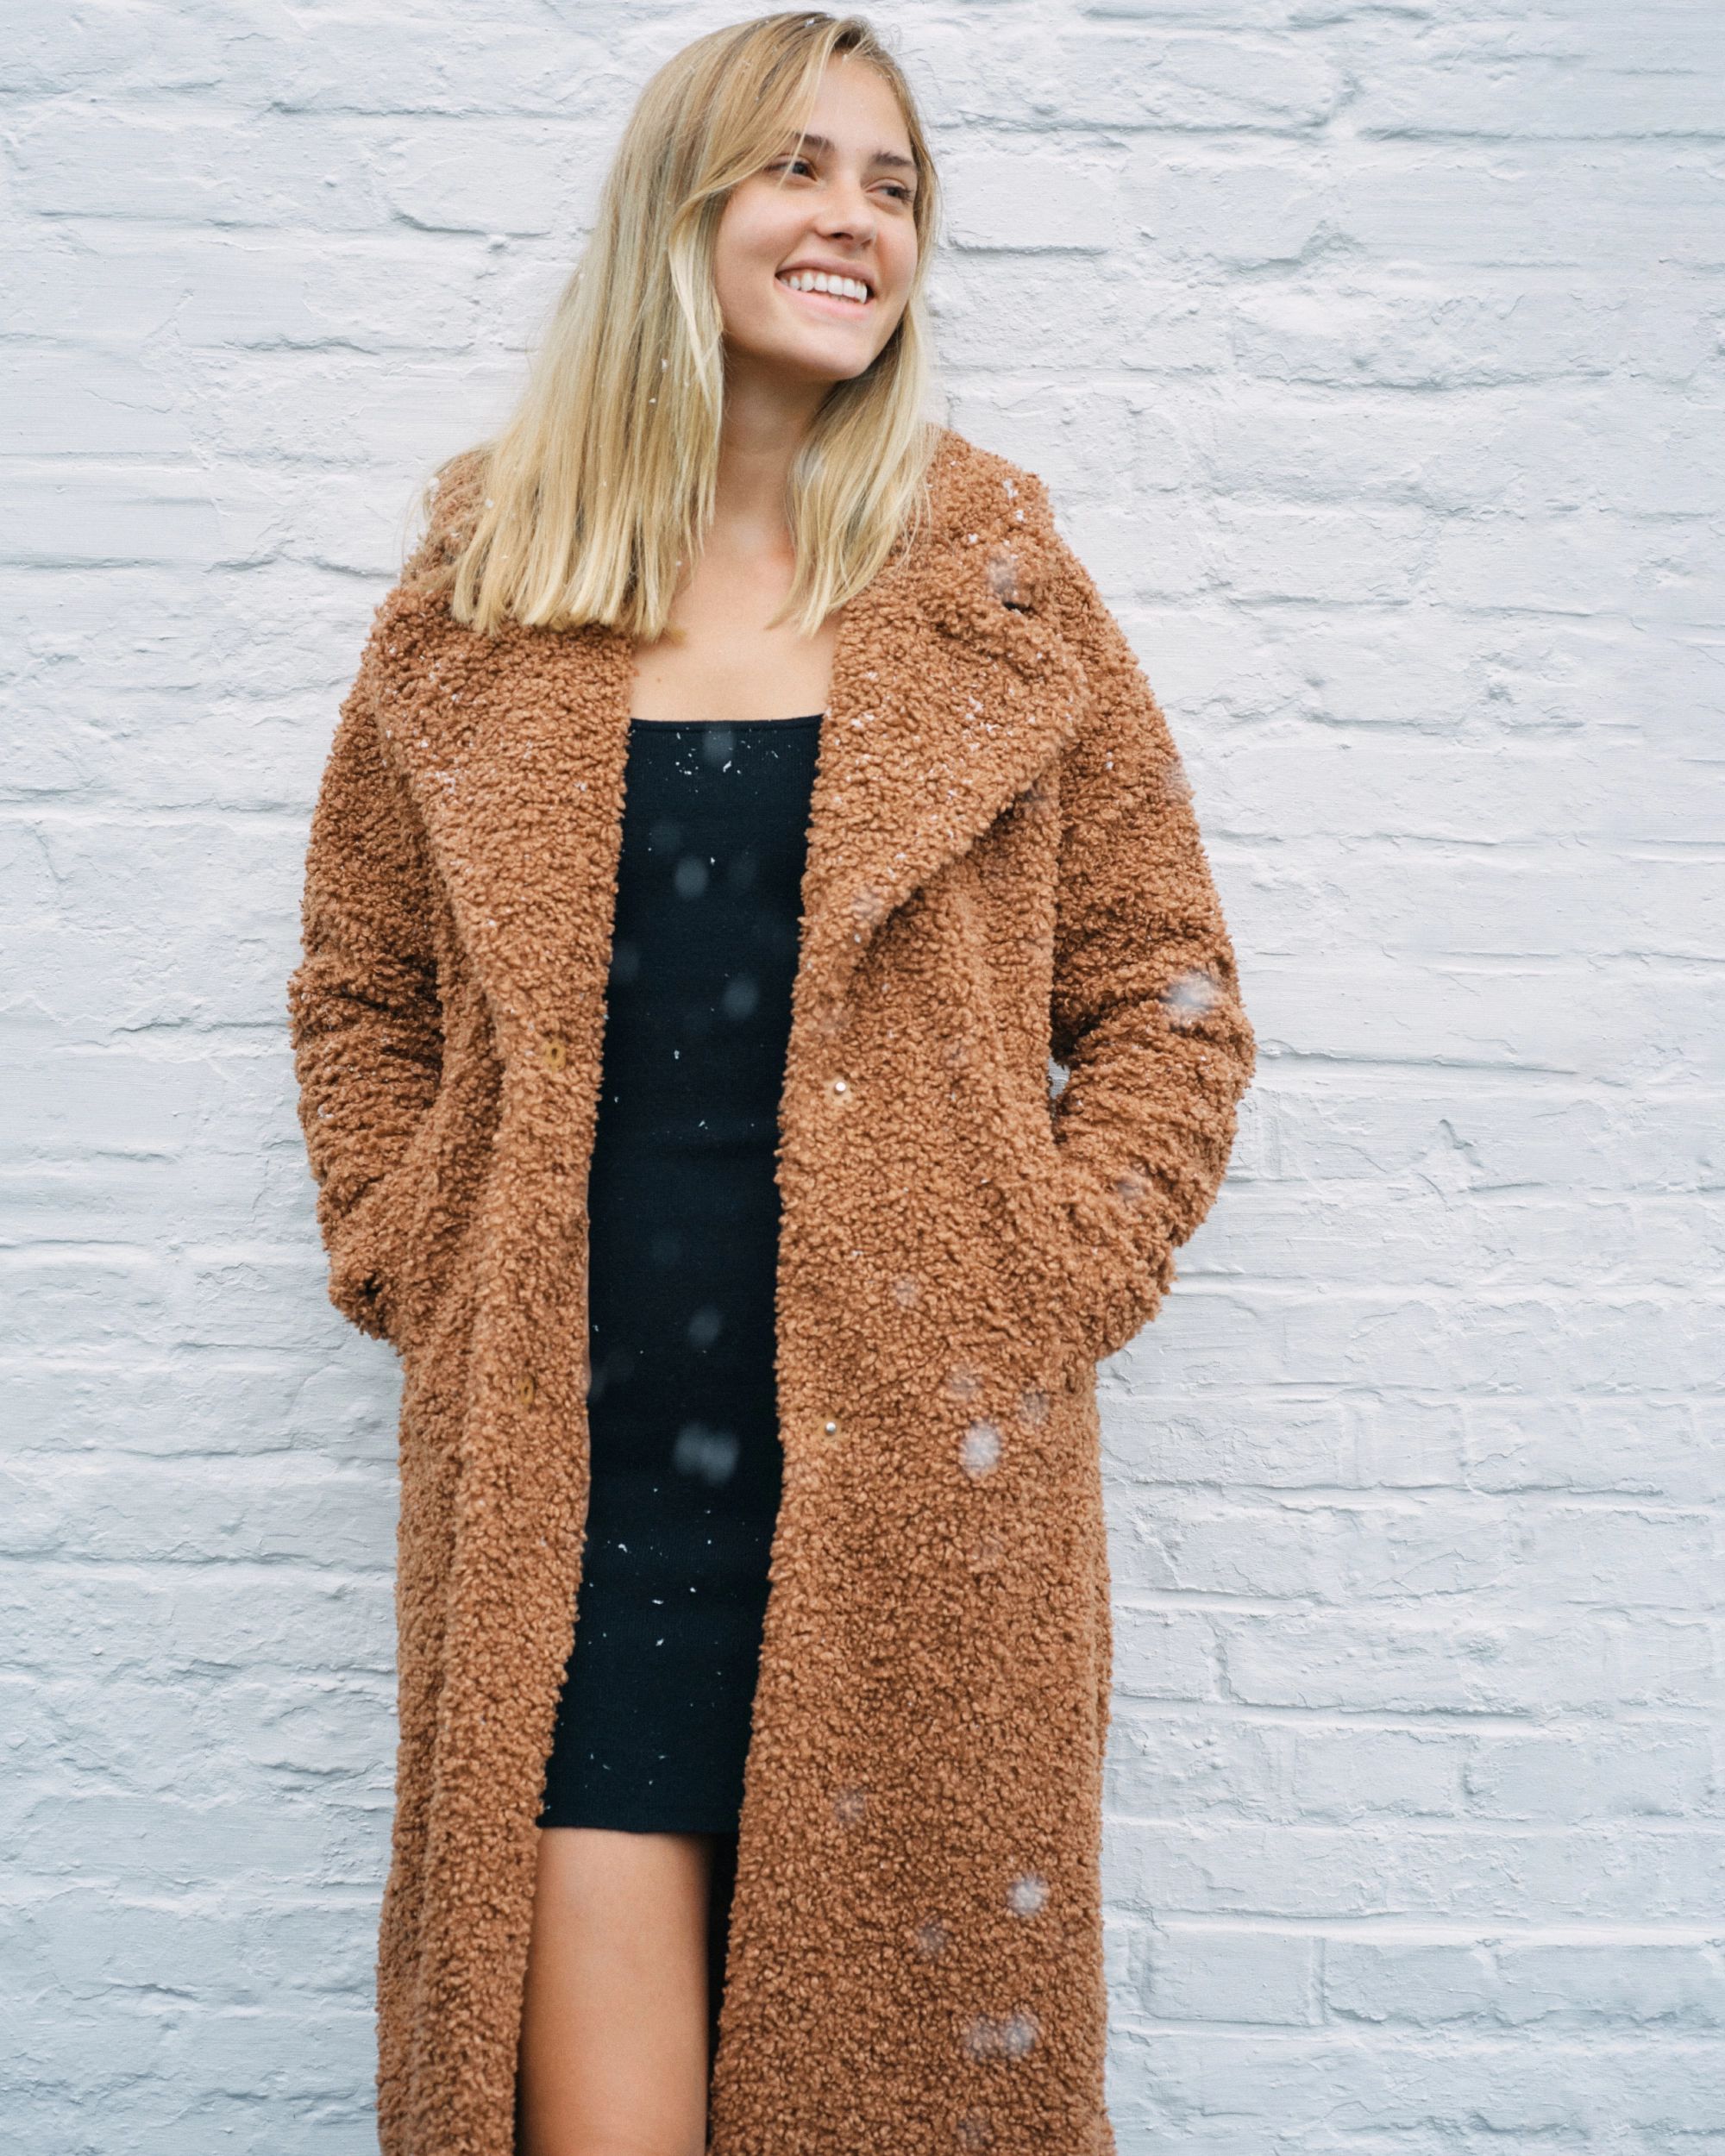 Long Sherpa Coat | Abercrombie & Fitch (US)